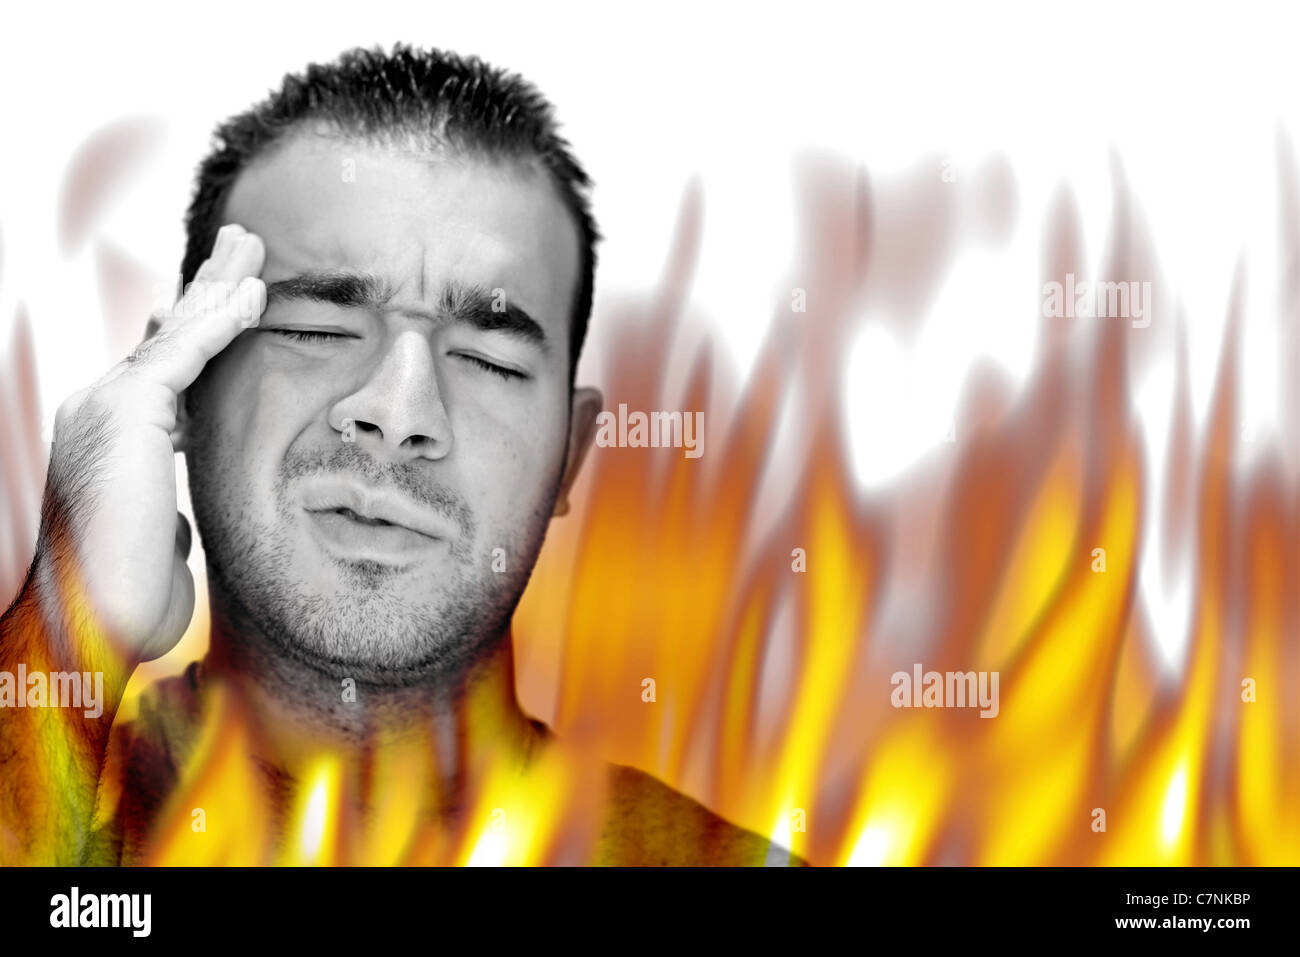 A man experiencing pain and suffering with hot fiery flames burning around him. Stock Photo